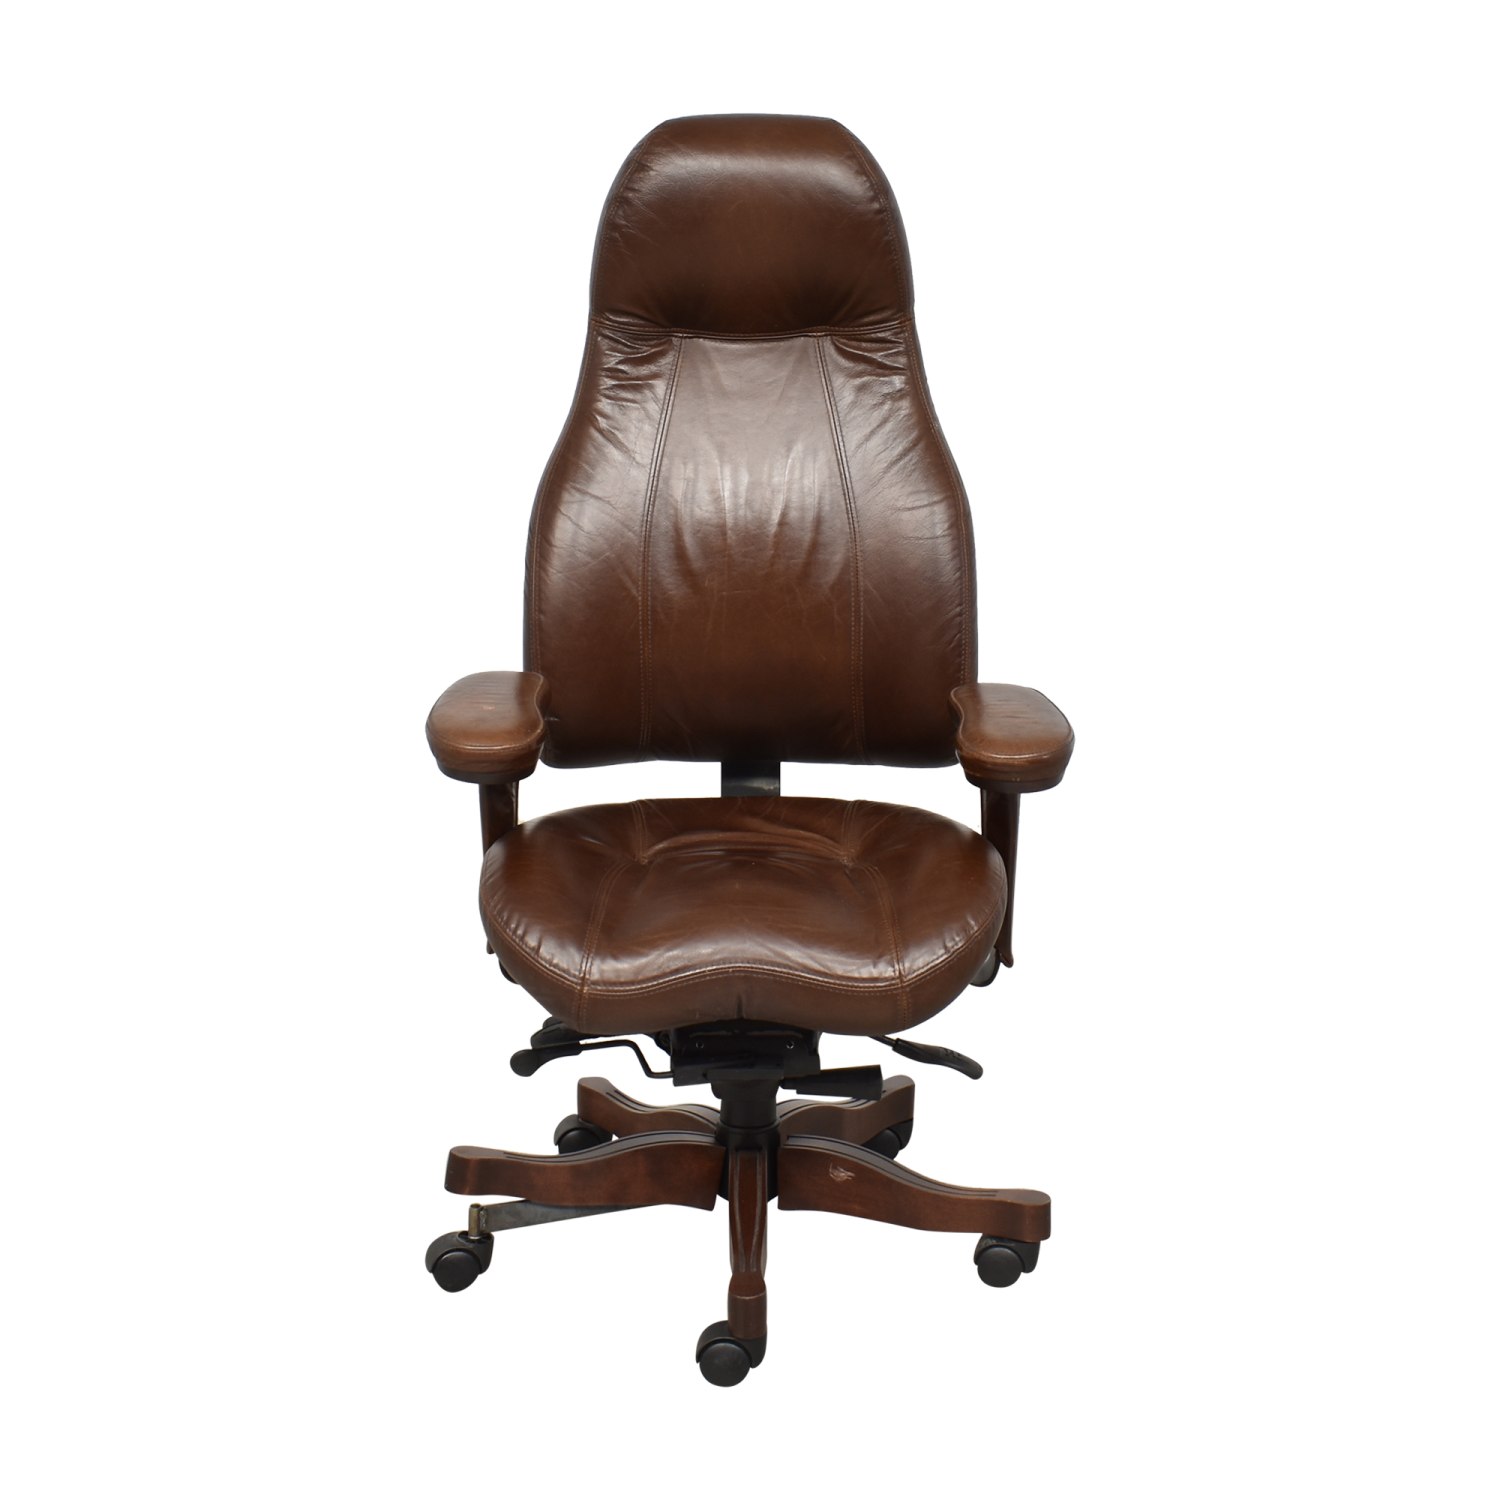 https://res.cloudinary.com/dkqtxtobb/image/upload/f_auto,q_auto:best,w_1500/product-assets/435309/shop/chairs/home-office-chairs/lifeform-ultimate-executive-high-back-ergonomic-office-chair.jpeg